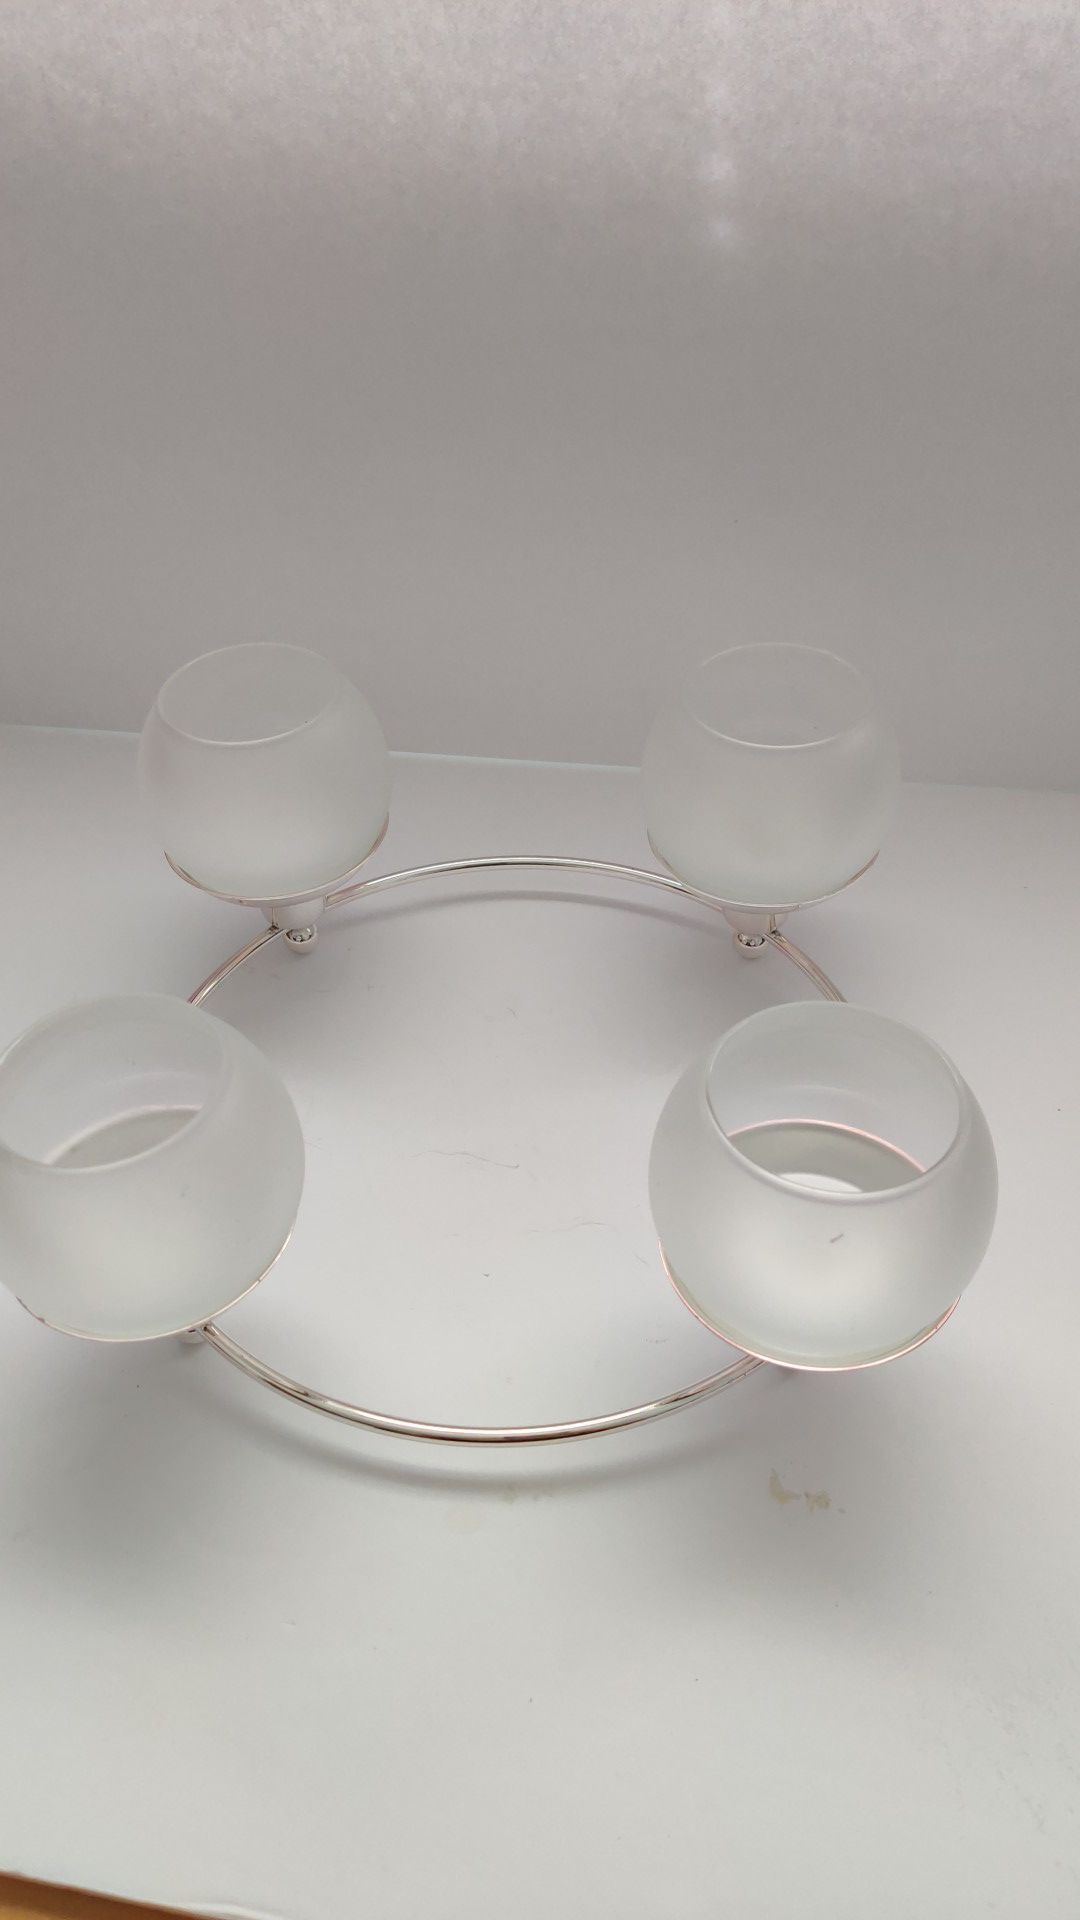 PartyLite P7745 Silver Played Century Candle Holder